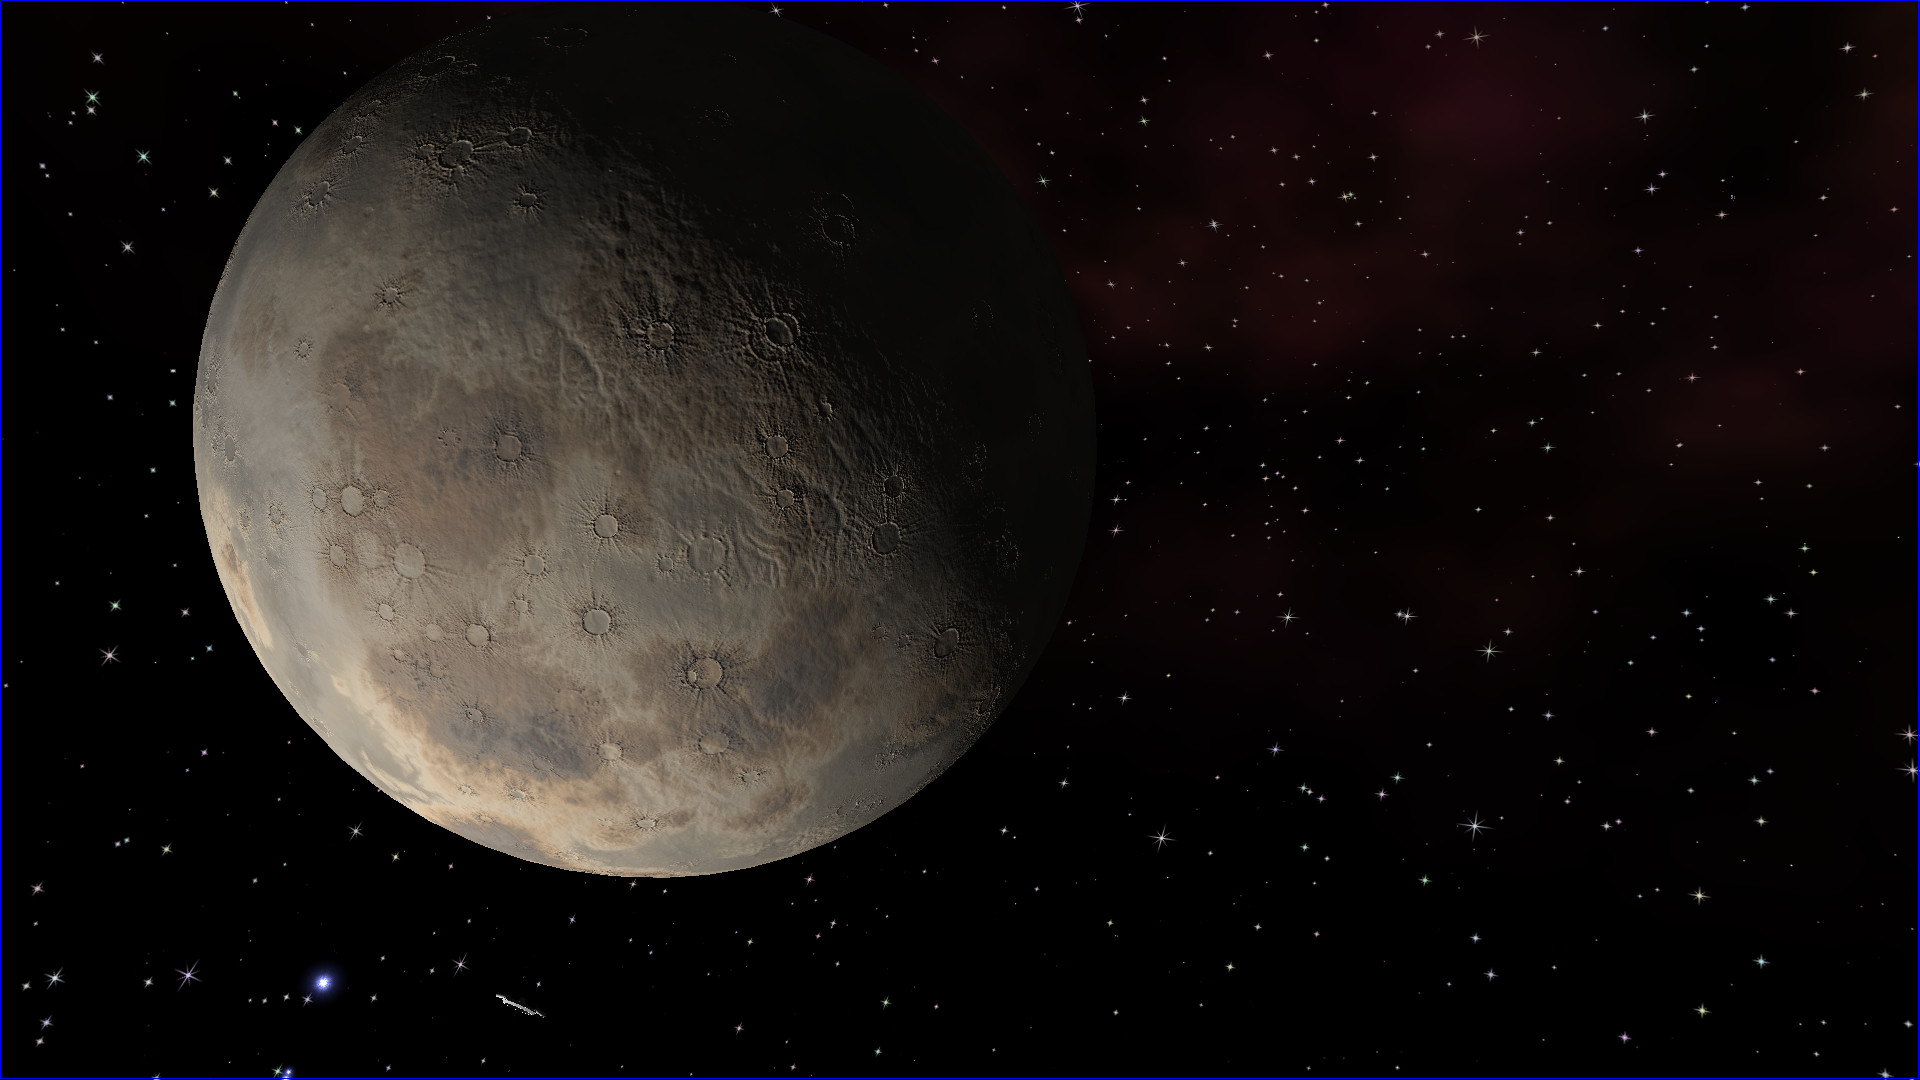 Image of a rocky planet